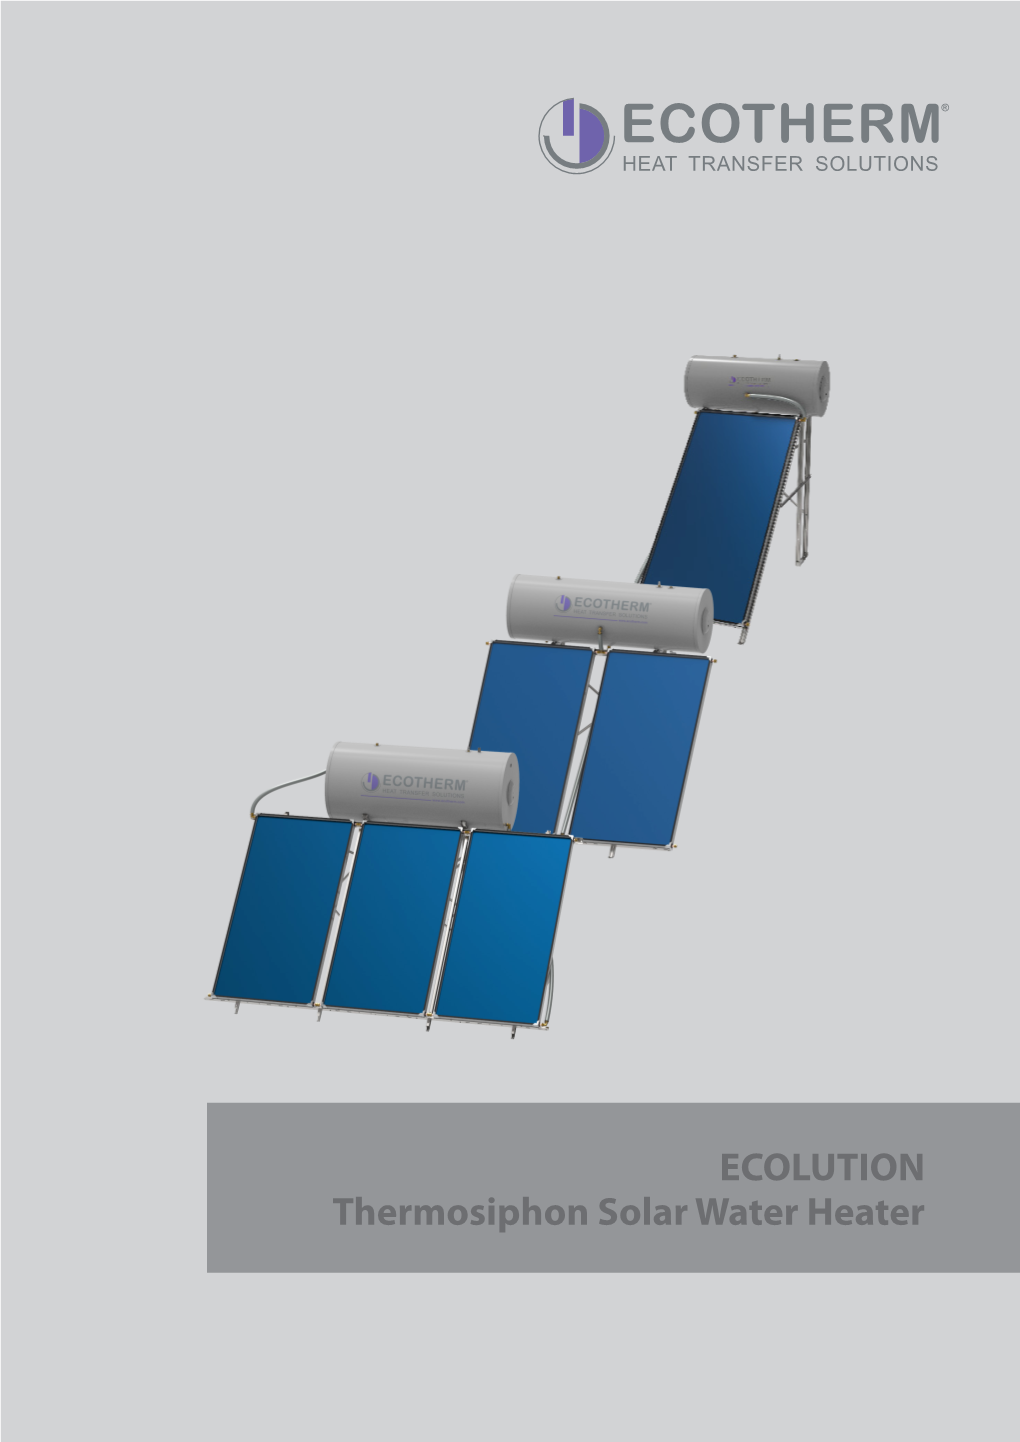 ECOLUTION Thermosiphon Solar Water Heater Ecotherm Is the Leading Brand for Turnkey Hot Water, Steam and Solar Systems for Hotels, Hospitals and the Industry